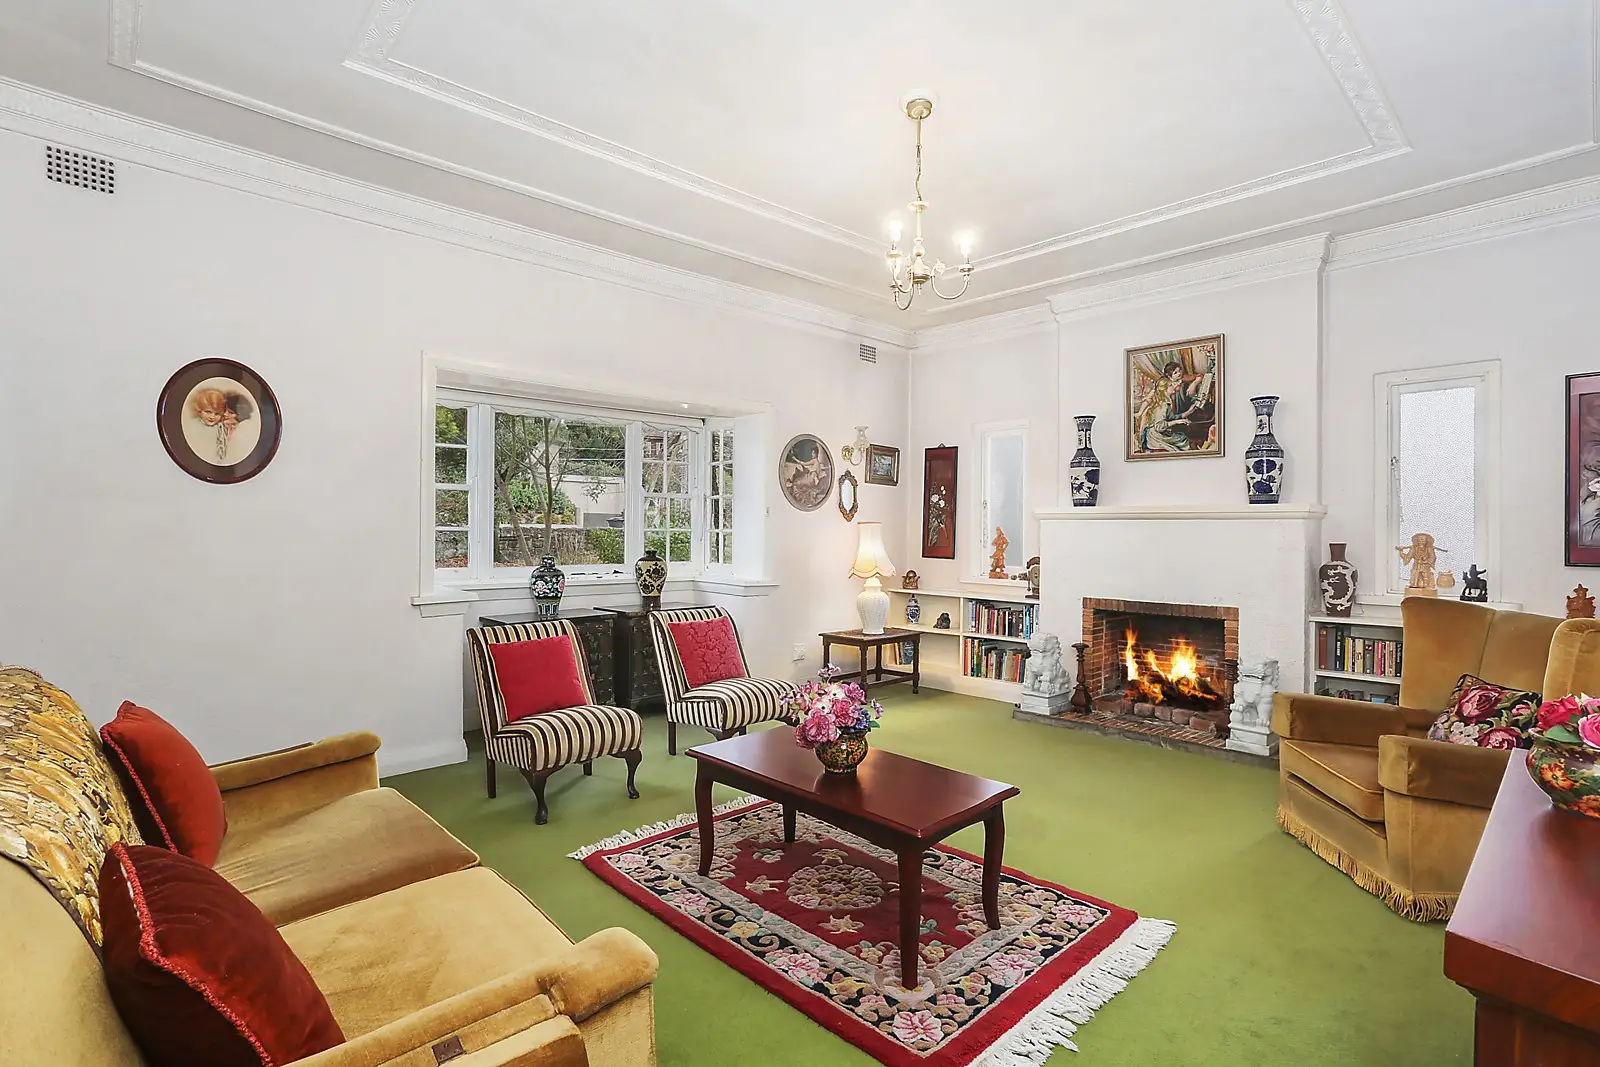 Photo #2: 1 Boolarong Rd, Pymble - Sold by Sydney Sotheby's International Realty